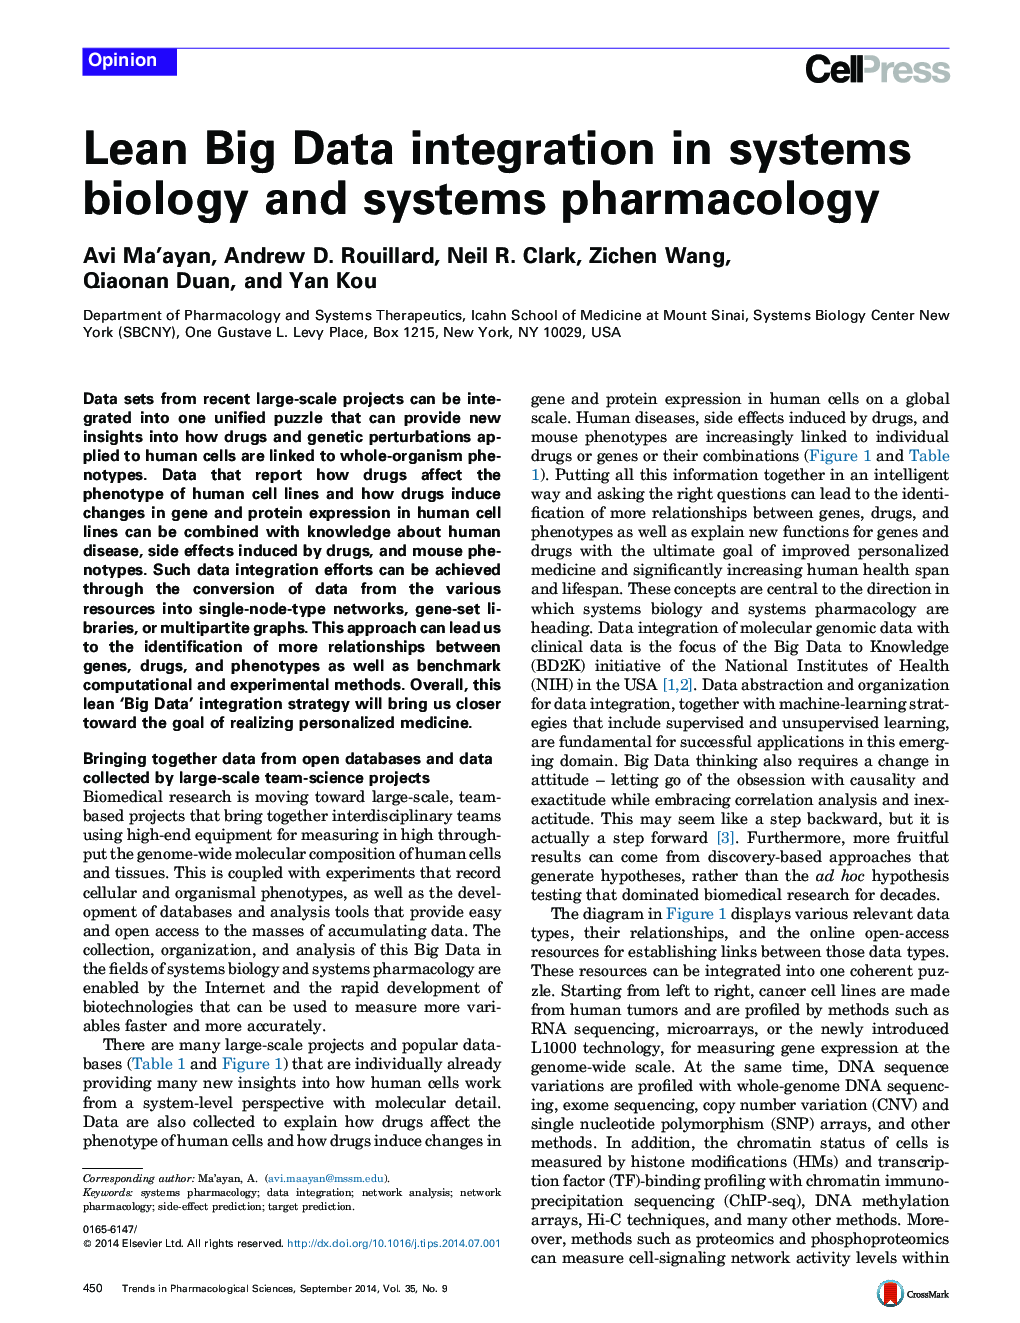 Lean Big Data integration in systems biology and systems pharmacology